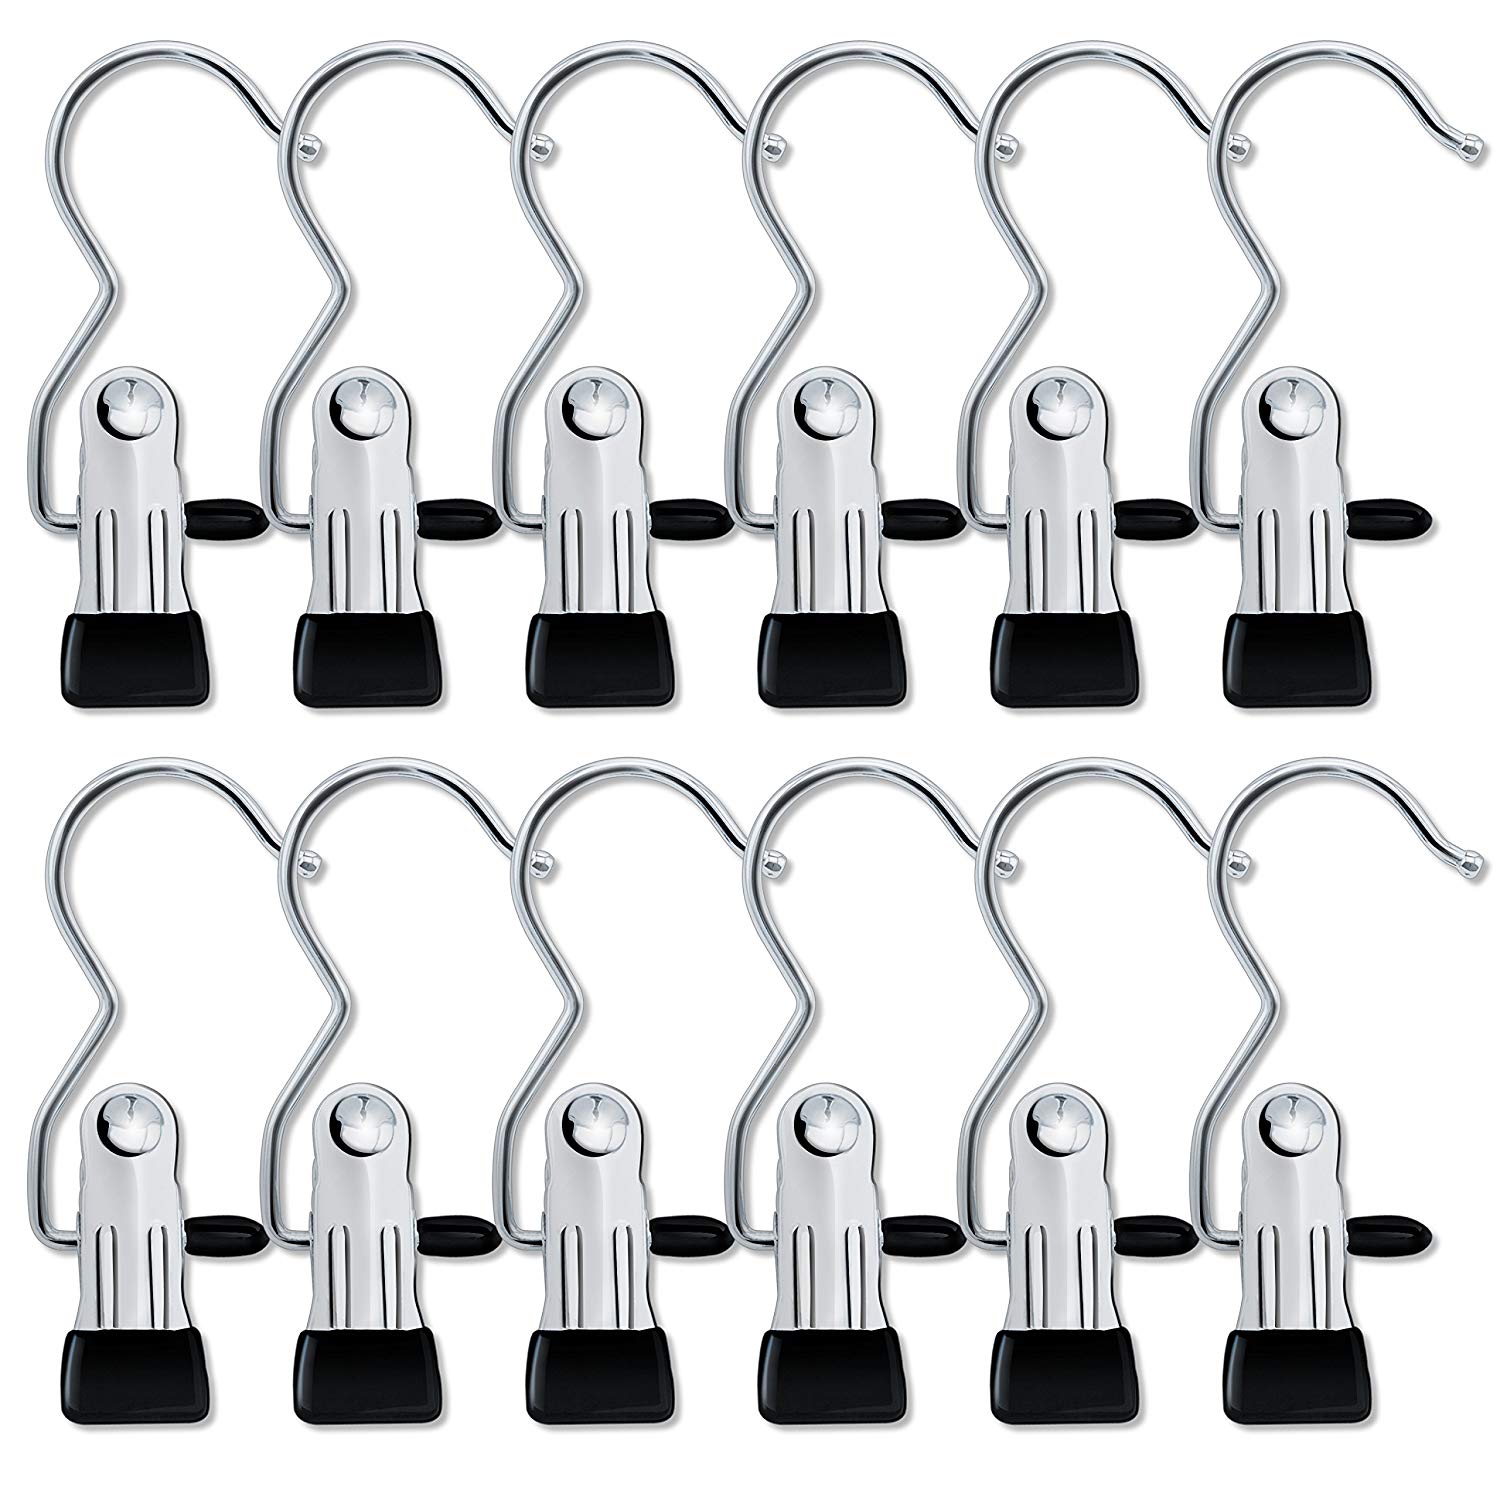 Ipow Set of 12 Portable Laundry Hook Hanging Clothes Pins Stainless steel Travel Home clothing Boot Hanger Hold Clips